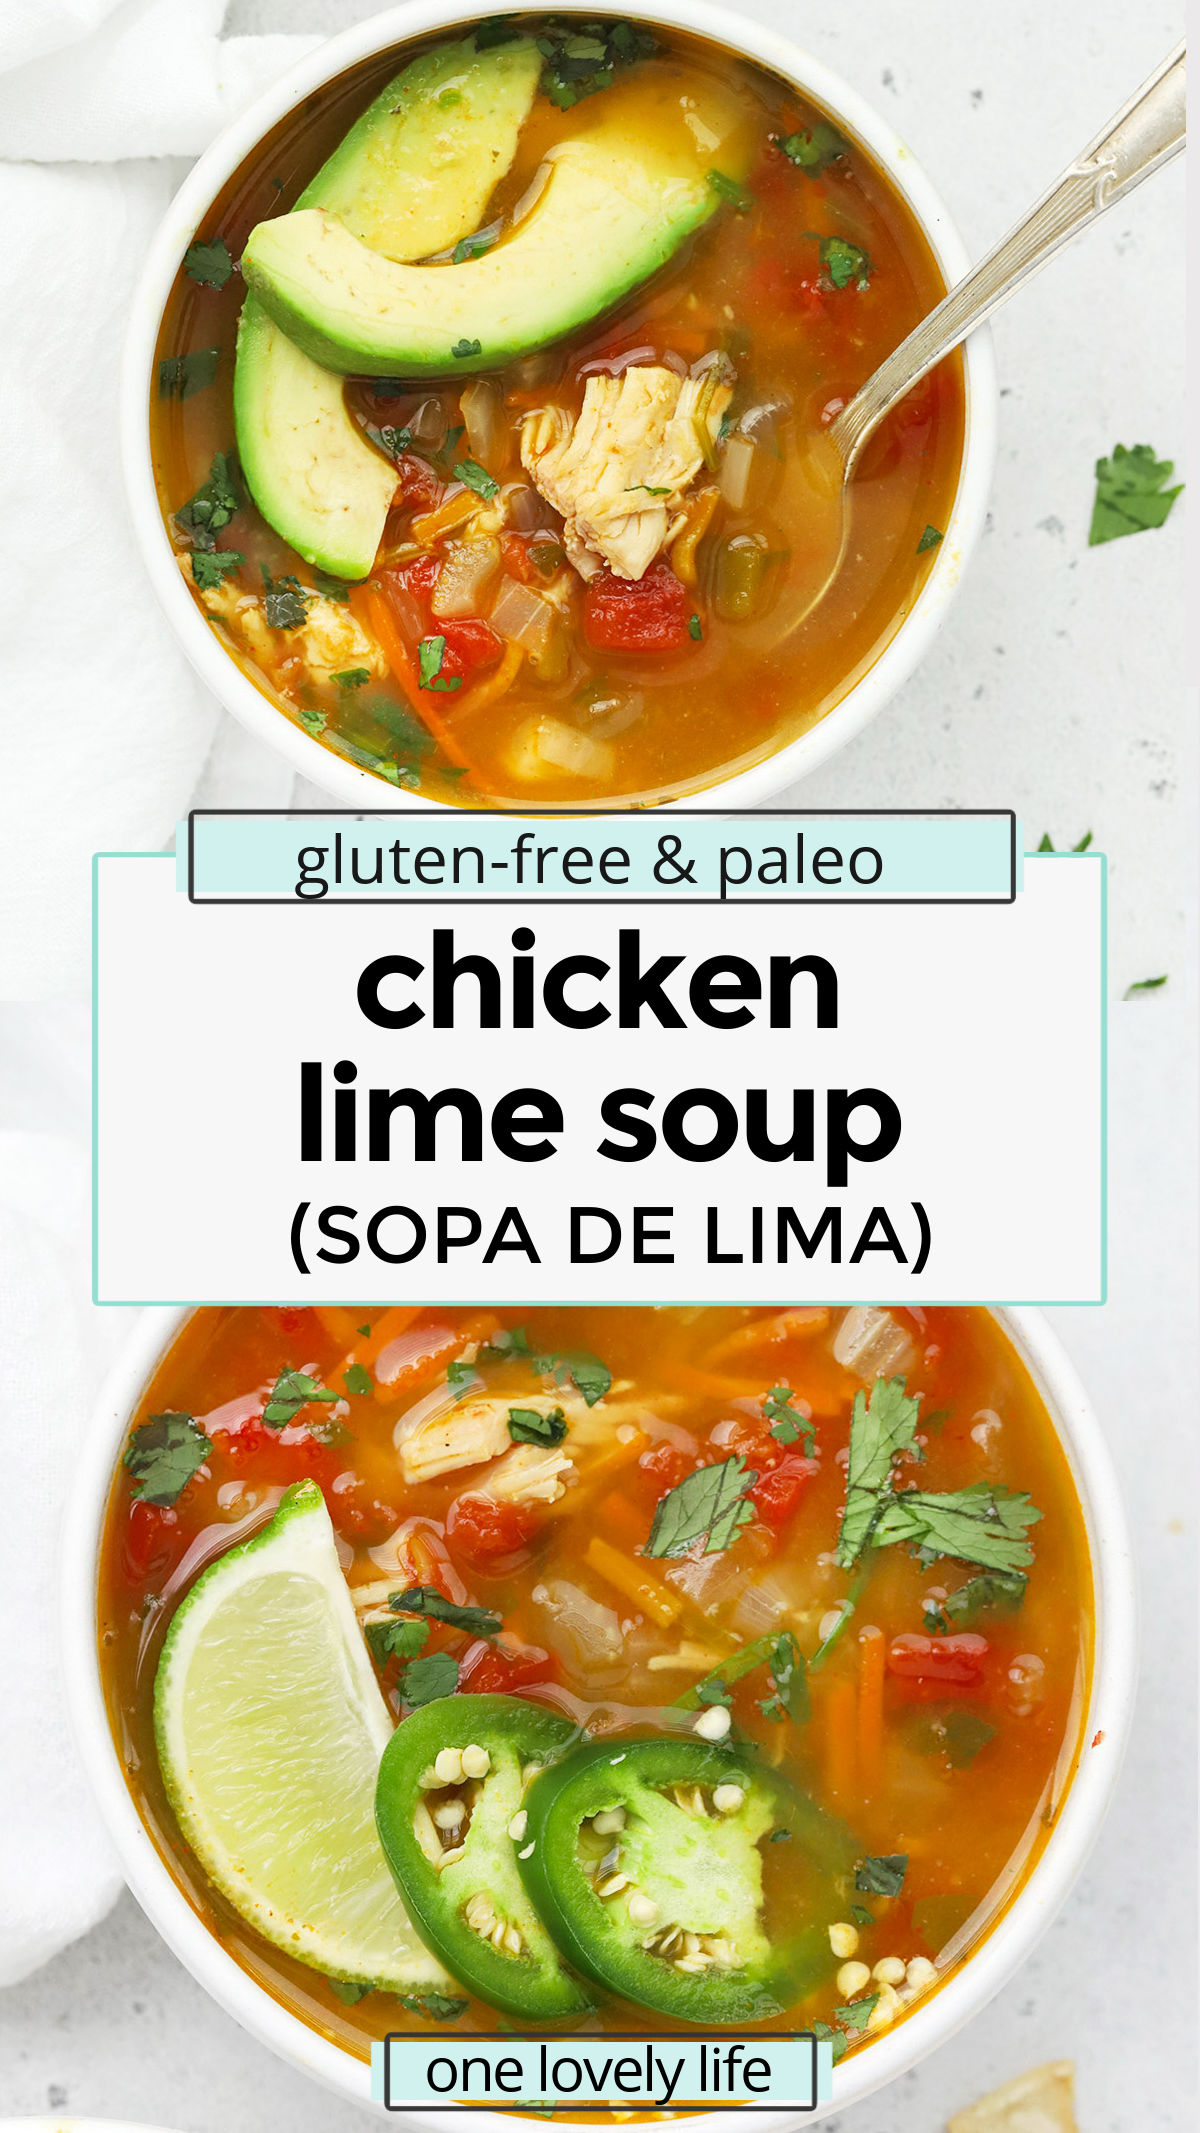 Chicken Lime Soup (Sopa De Lima) - Flavorful, filling & a little bit spicy, this yummy Mexican chicken soup is always a hit! (Paleo, Whole30) // Sopa De Lime recipe // Mexican Soup // Chicken Lime Taco Soup // Chicken Lime Tortilla Soup // Healthy Soup // Paleo Soup // Whole30 Soup // Healthy Dinner // Healthy Lunch